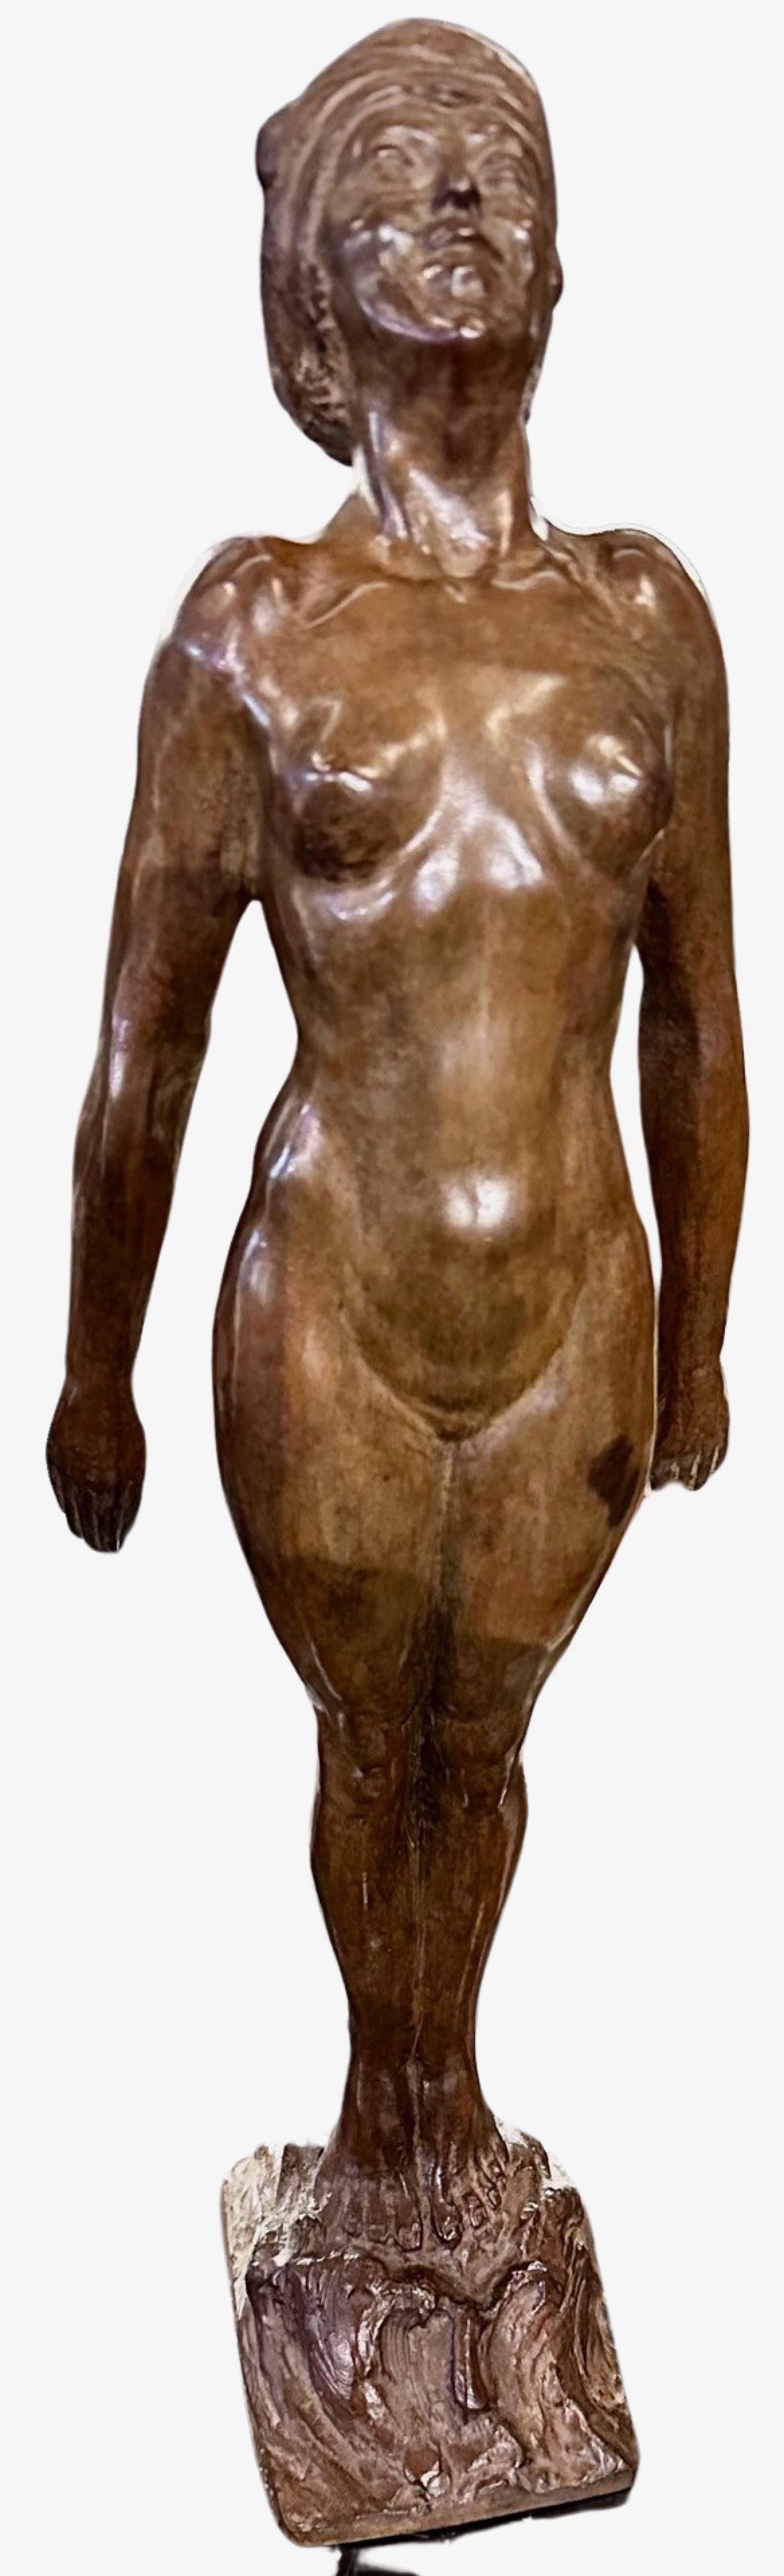 The French Art Deco Bathing Nude Female Statue, crafted by the Belgian sculptor Guillaume Dumont in 1923, is a testament to his artistic brilliance. Dumont, born in 1889, though the date of his death remains unknown, left an indelible mark on the